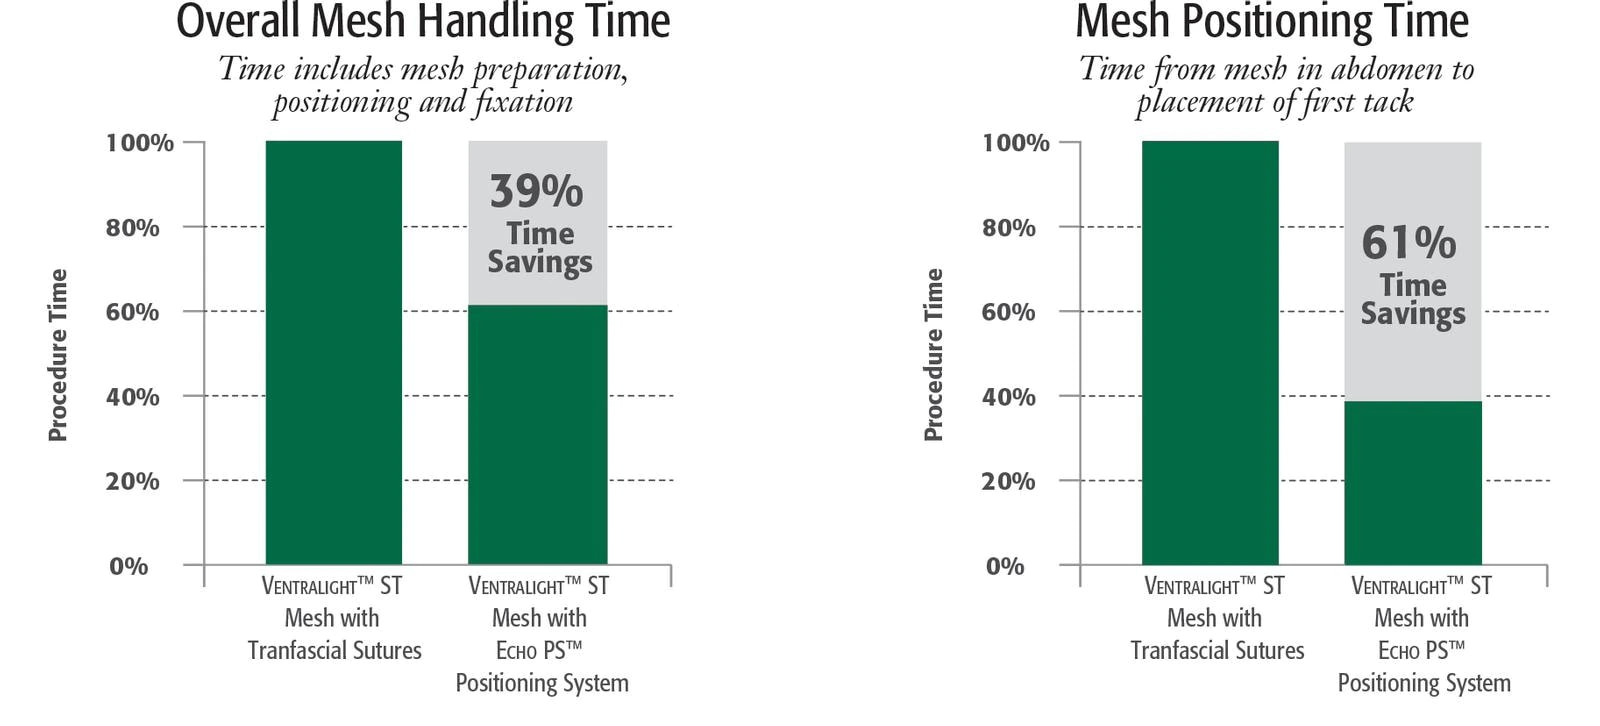 Mesh Handling Times and Positioning Times Charts